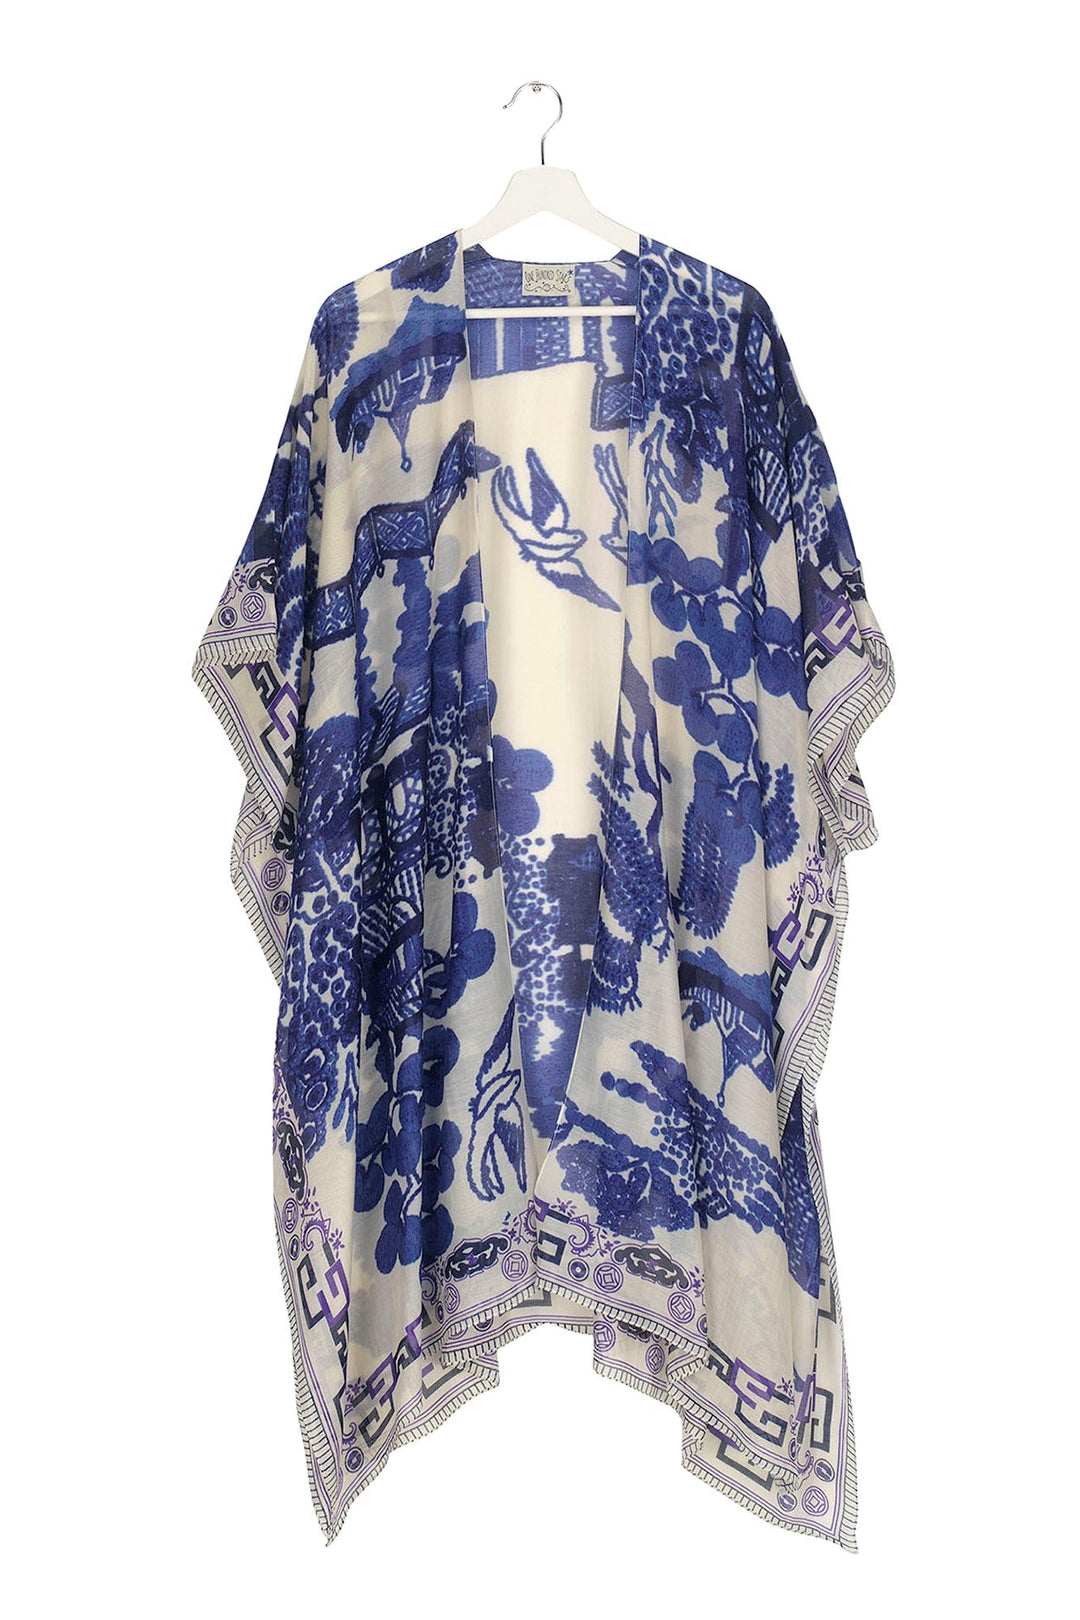 One Hundred Stars Giant Willow Blue Throwover- These lightweight throwovers make the perfect cover up, they are mid-length with an open front and loose arms, perfect for the warmer months or worn on holiday as the ideal resort wear. 